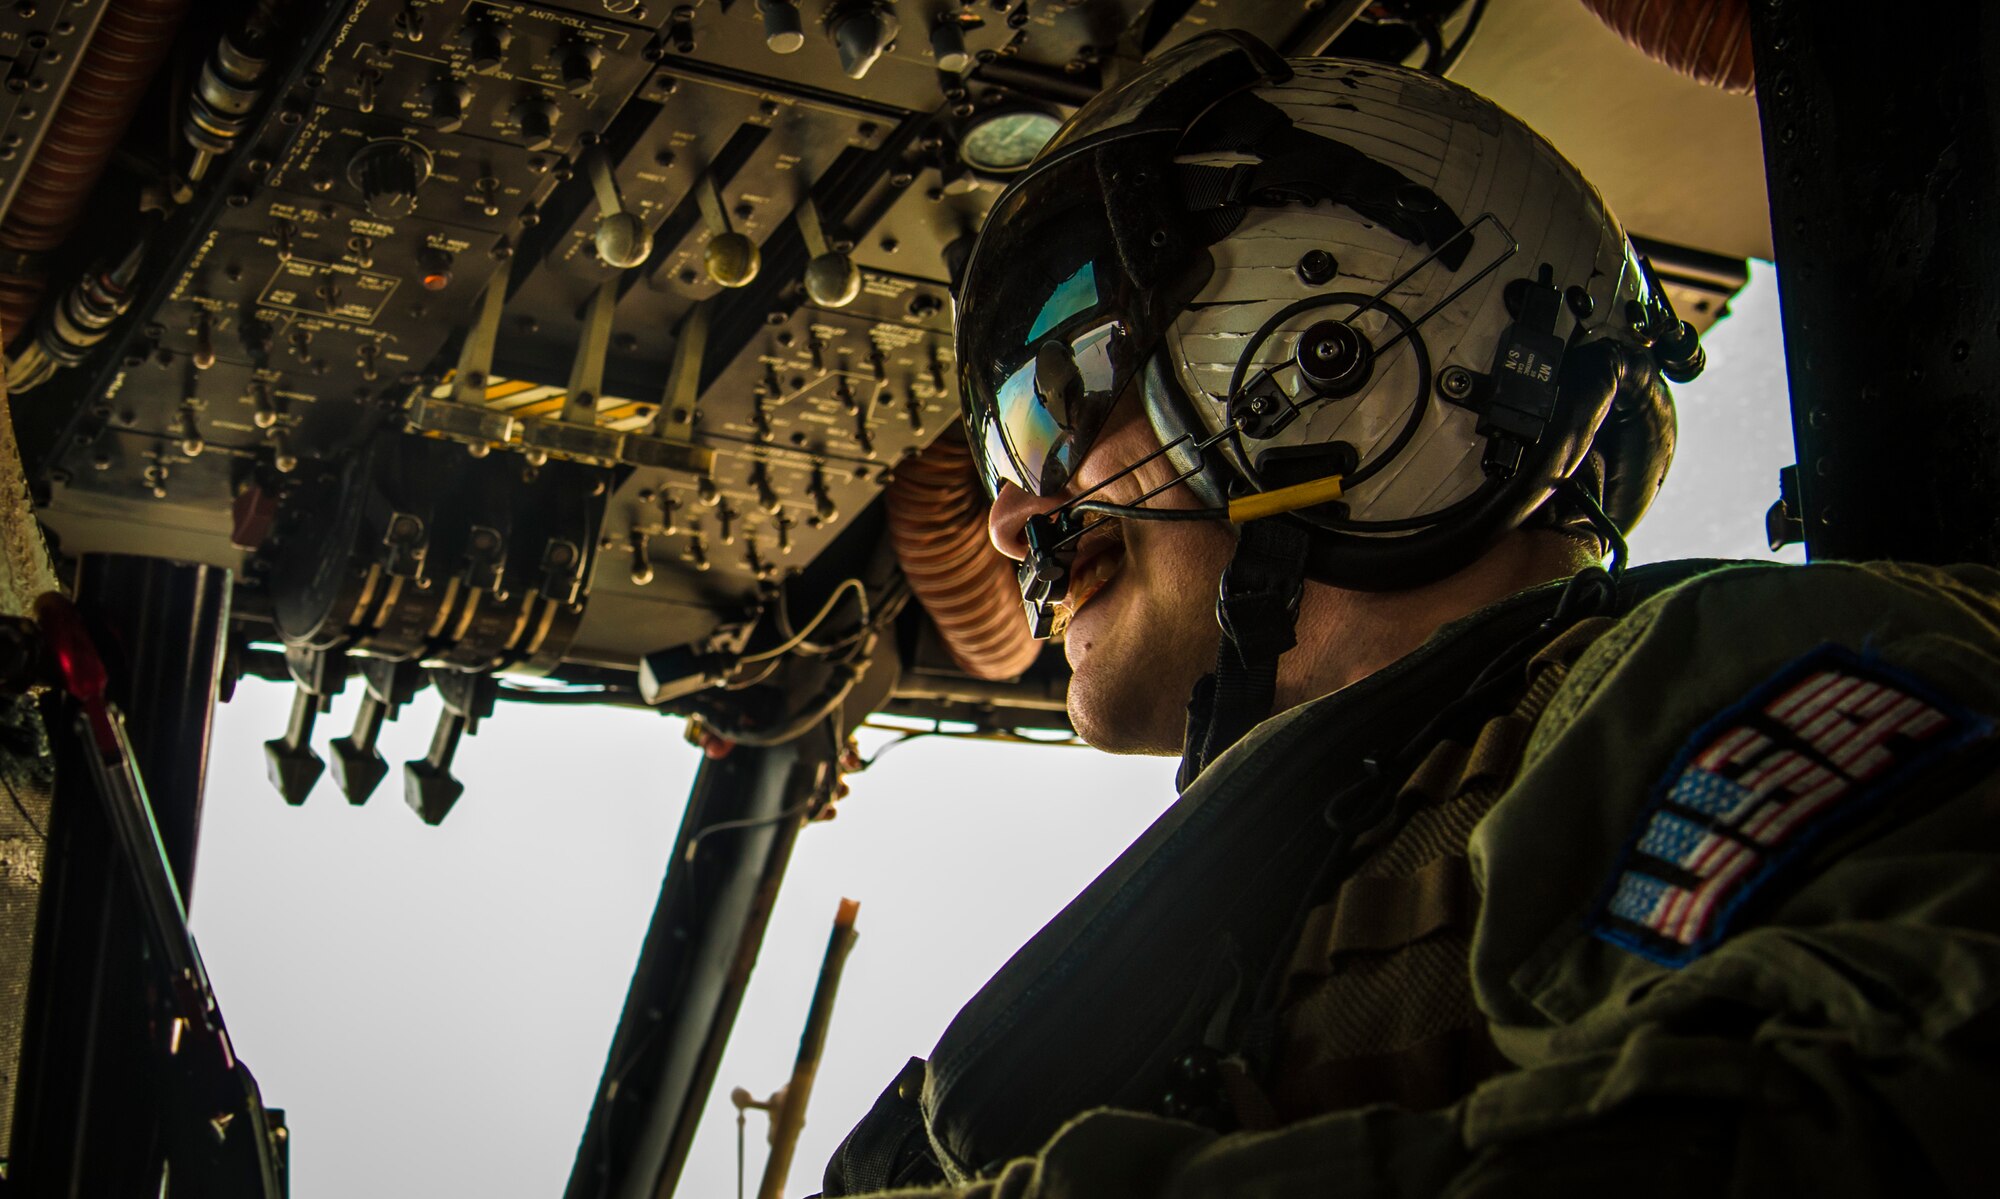 U.S. Navy Petty Officer 2nd Class Morgan Boltz, a naval aircrewman with the Helicopter Mine Countermeasures Squadron 14, Detachment 2A, looks out of the window of an MH-53E Sea Dragon while taking part in Mine Countermeasures Exercise 2JA near Misawa Air Base, Japan, July 22, 2016. The annual bilateral exercise took place between the U.S. and Japan from July 15 to 30, with the goal of strengthening interoperability and mine countermeasure capabilities. (U.S. Air Force photo by Senior Airman Jordyn Fetter)